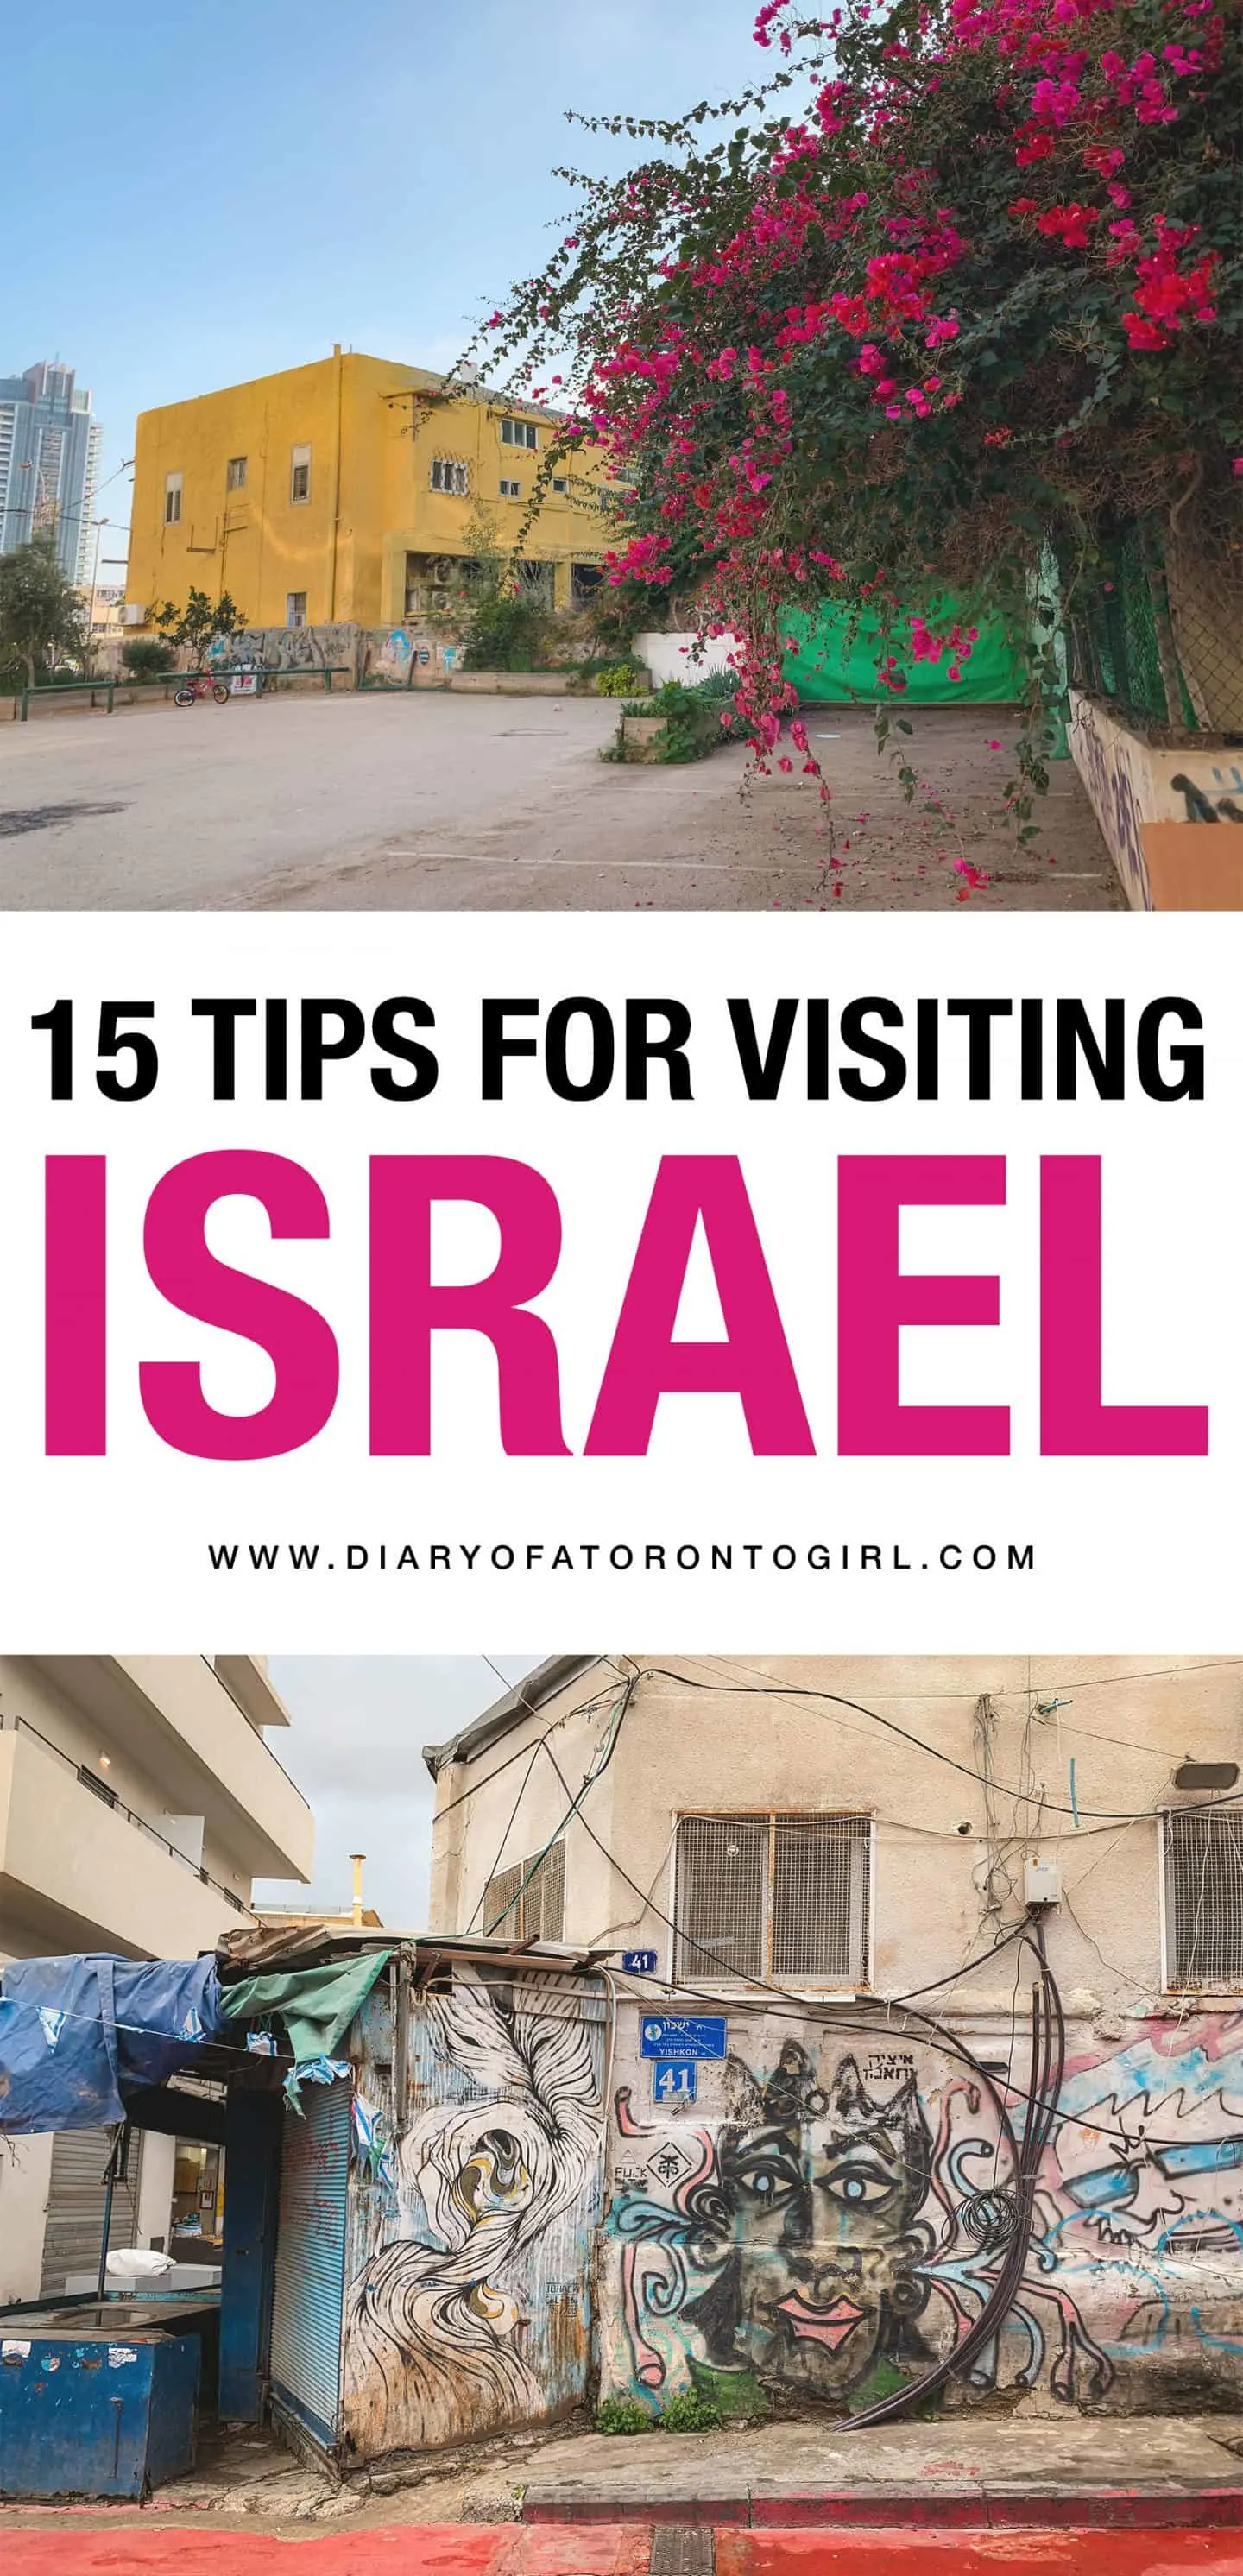 Helpful tips on visiting Tel Aviv, Israel, including what to wear and things you need to know!